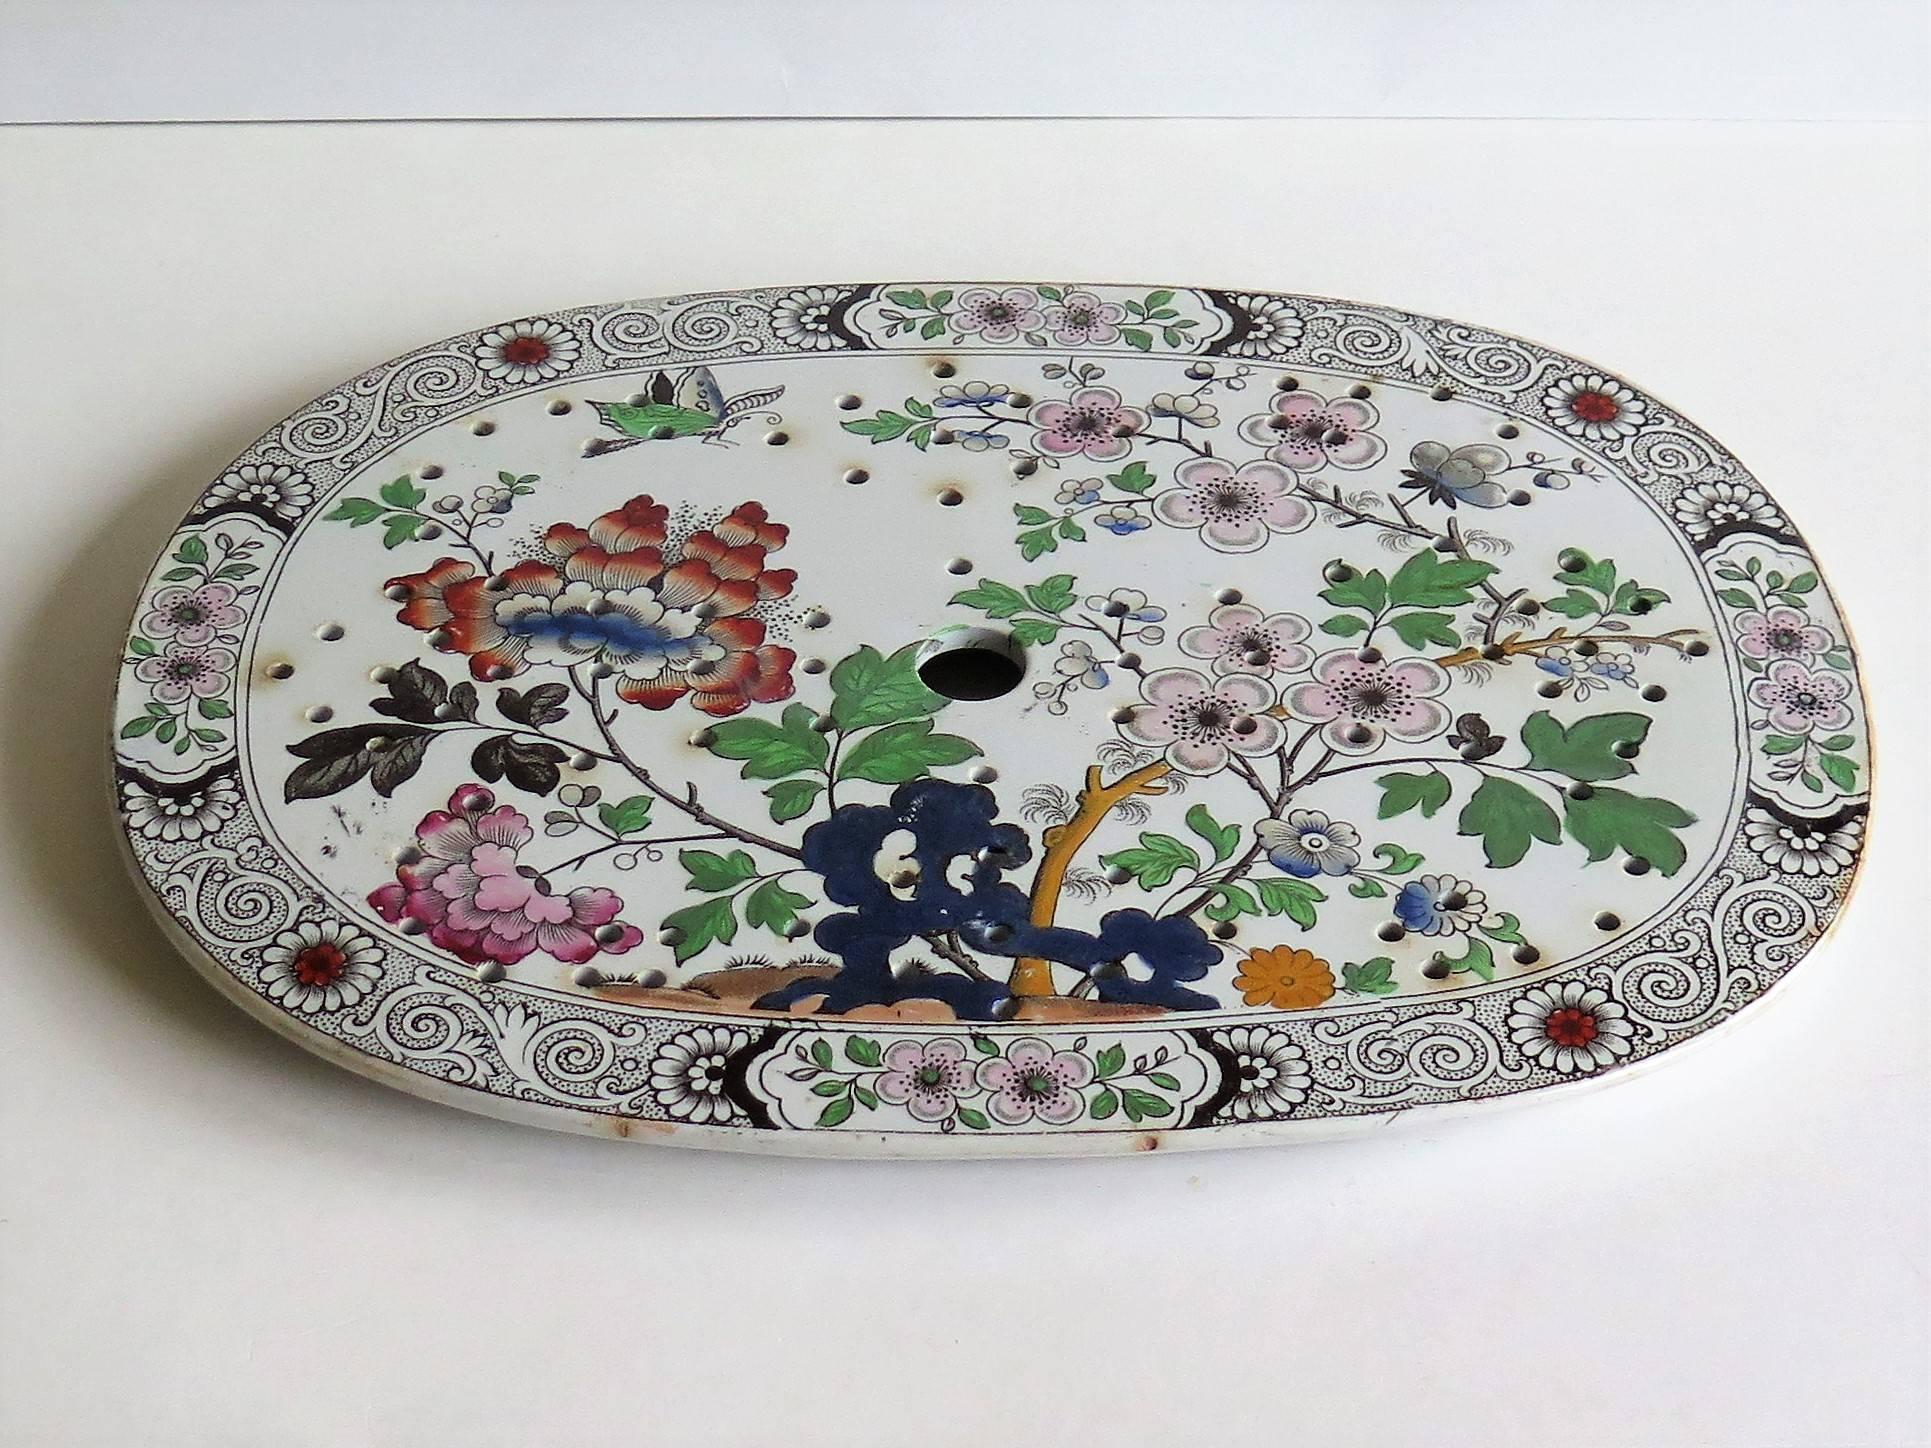 Hand-Painted Georgian Ironstone Platter or Drainer Plate by Hicks Meigh & Johnson, Circa 1830 For Sale